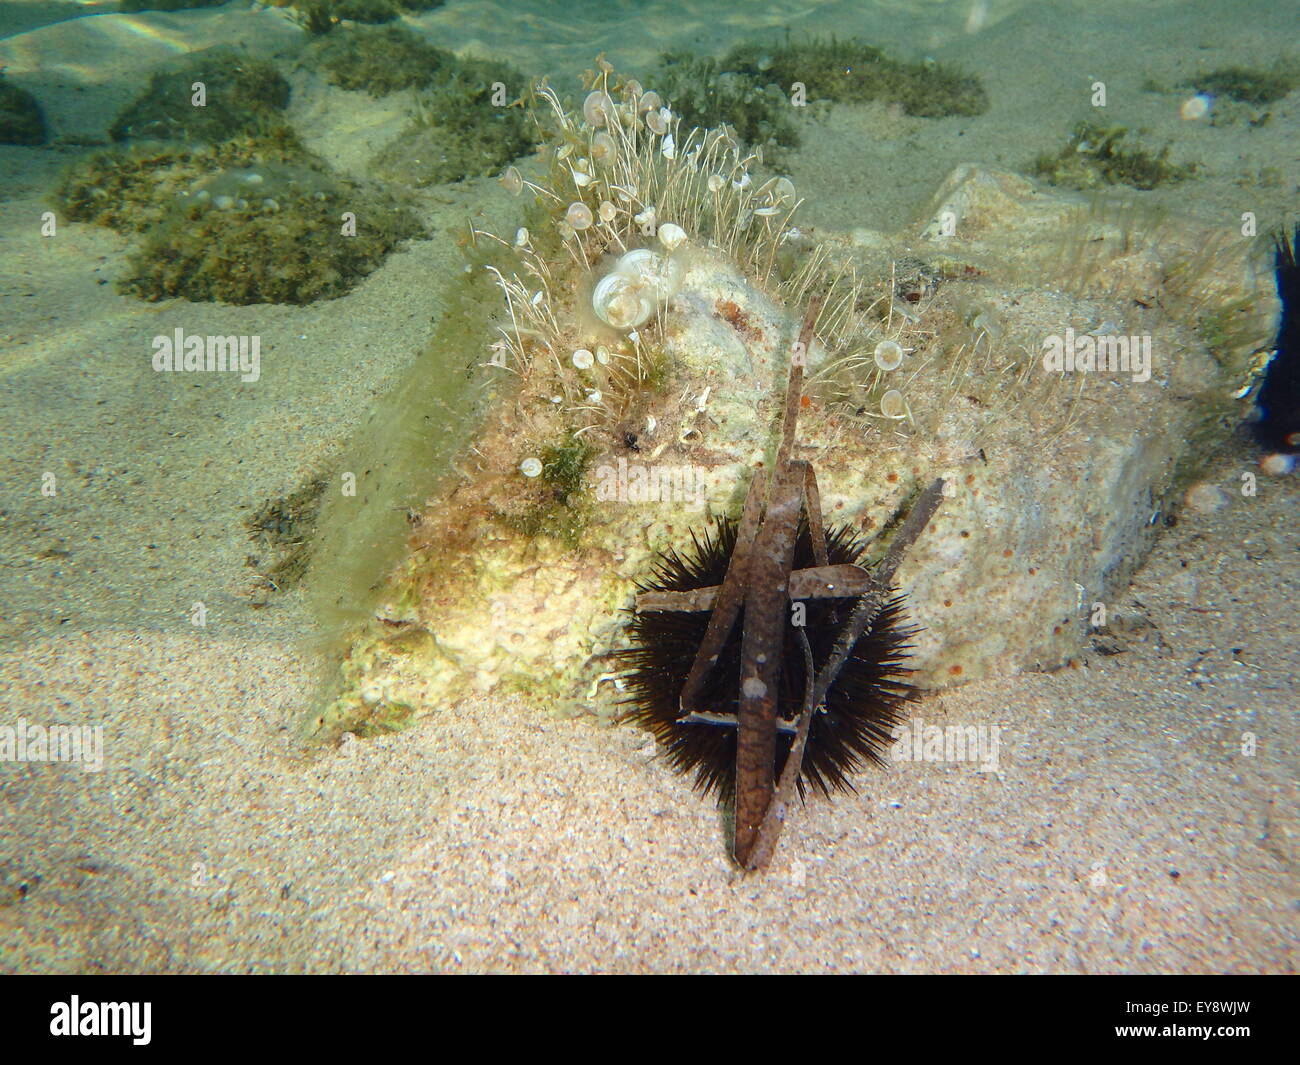 Sea life, shells, animals and fish at the bottom of the sea, underwater photography. Stock Photo